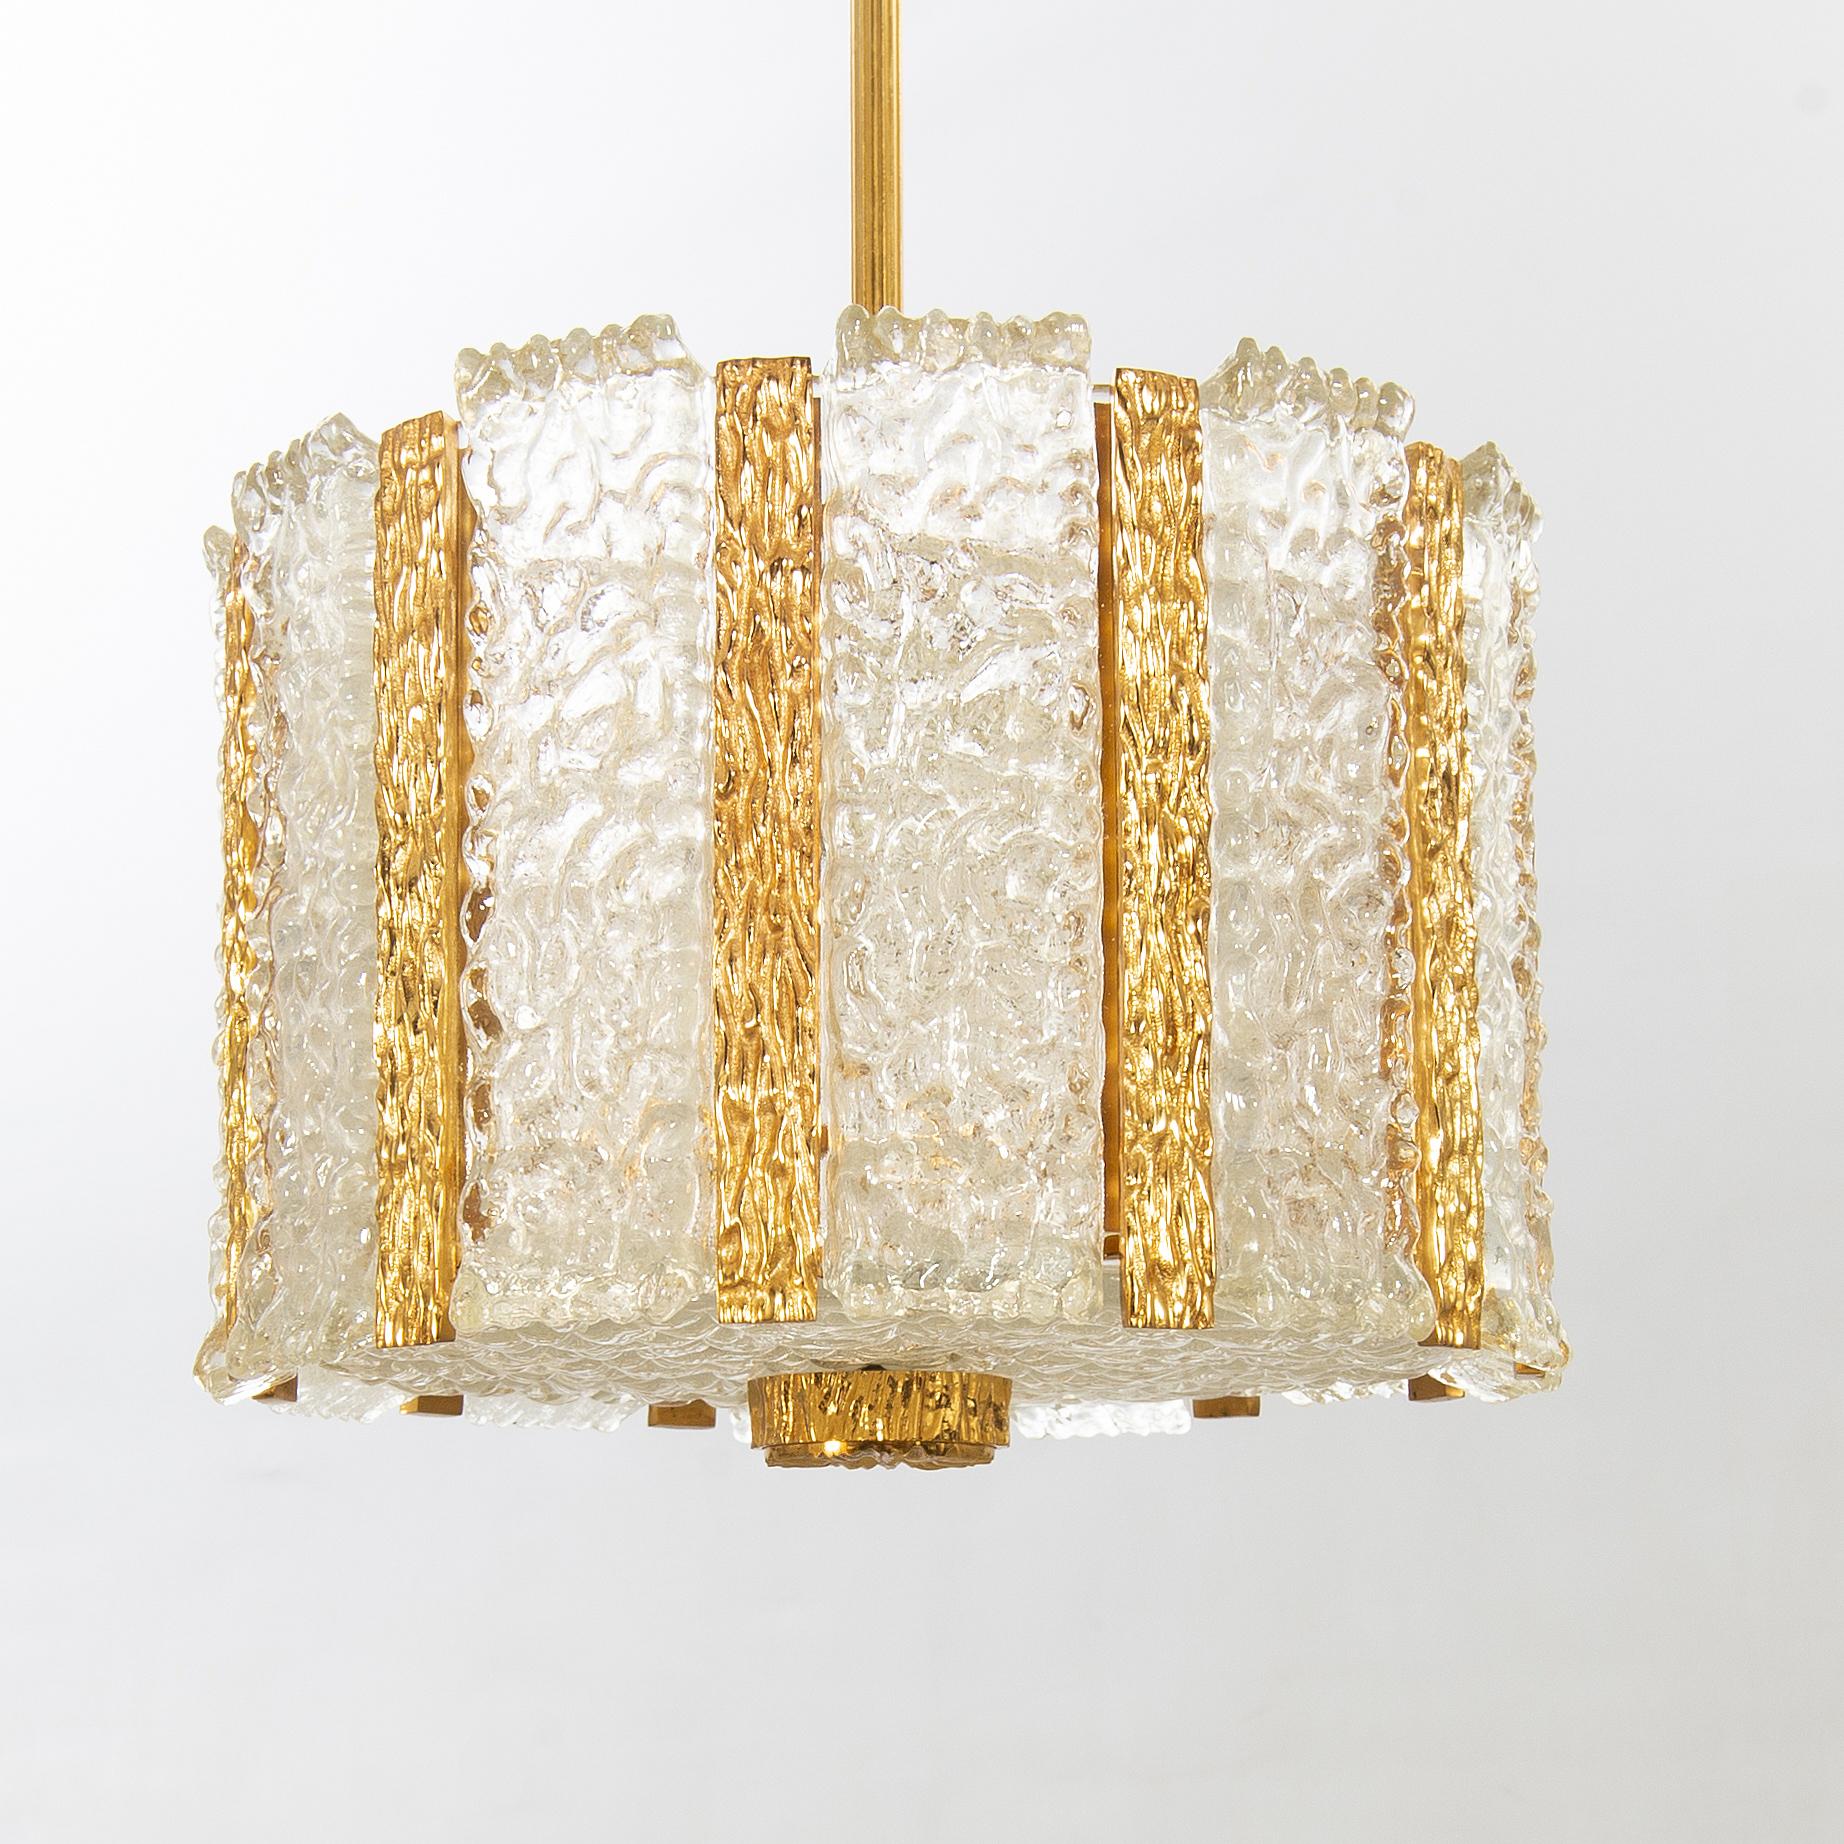 Rare model Ceiling Lamp by Carl Fagerlund, Brass & Cast Glass for Orrefors Sweden 1960
Pendant light  made in texturized  cast glass, mounted on a brass structure, with very nice details.
Good condition 